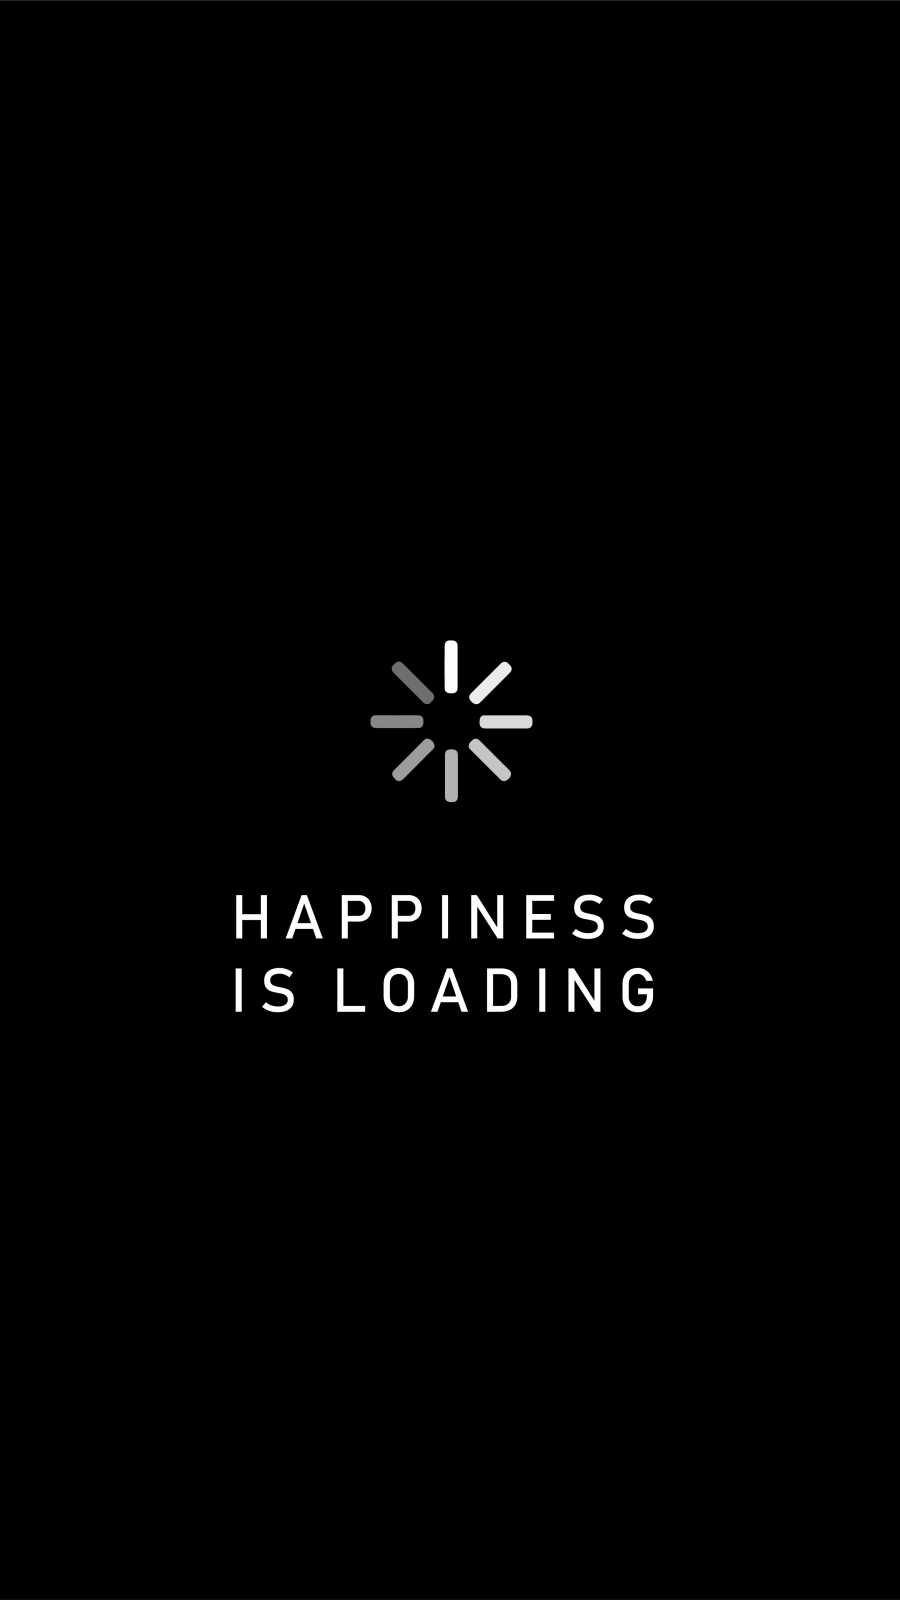 Happiness is Loading